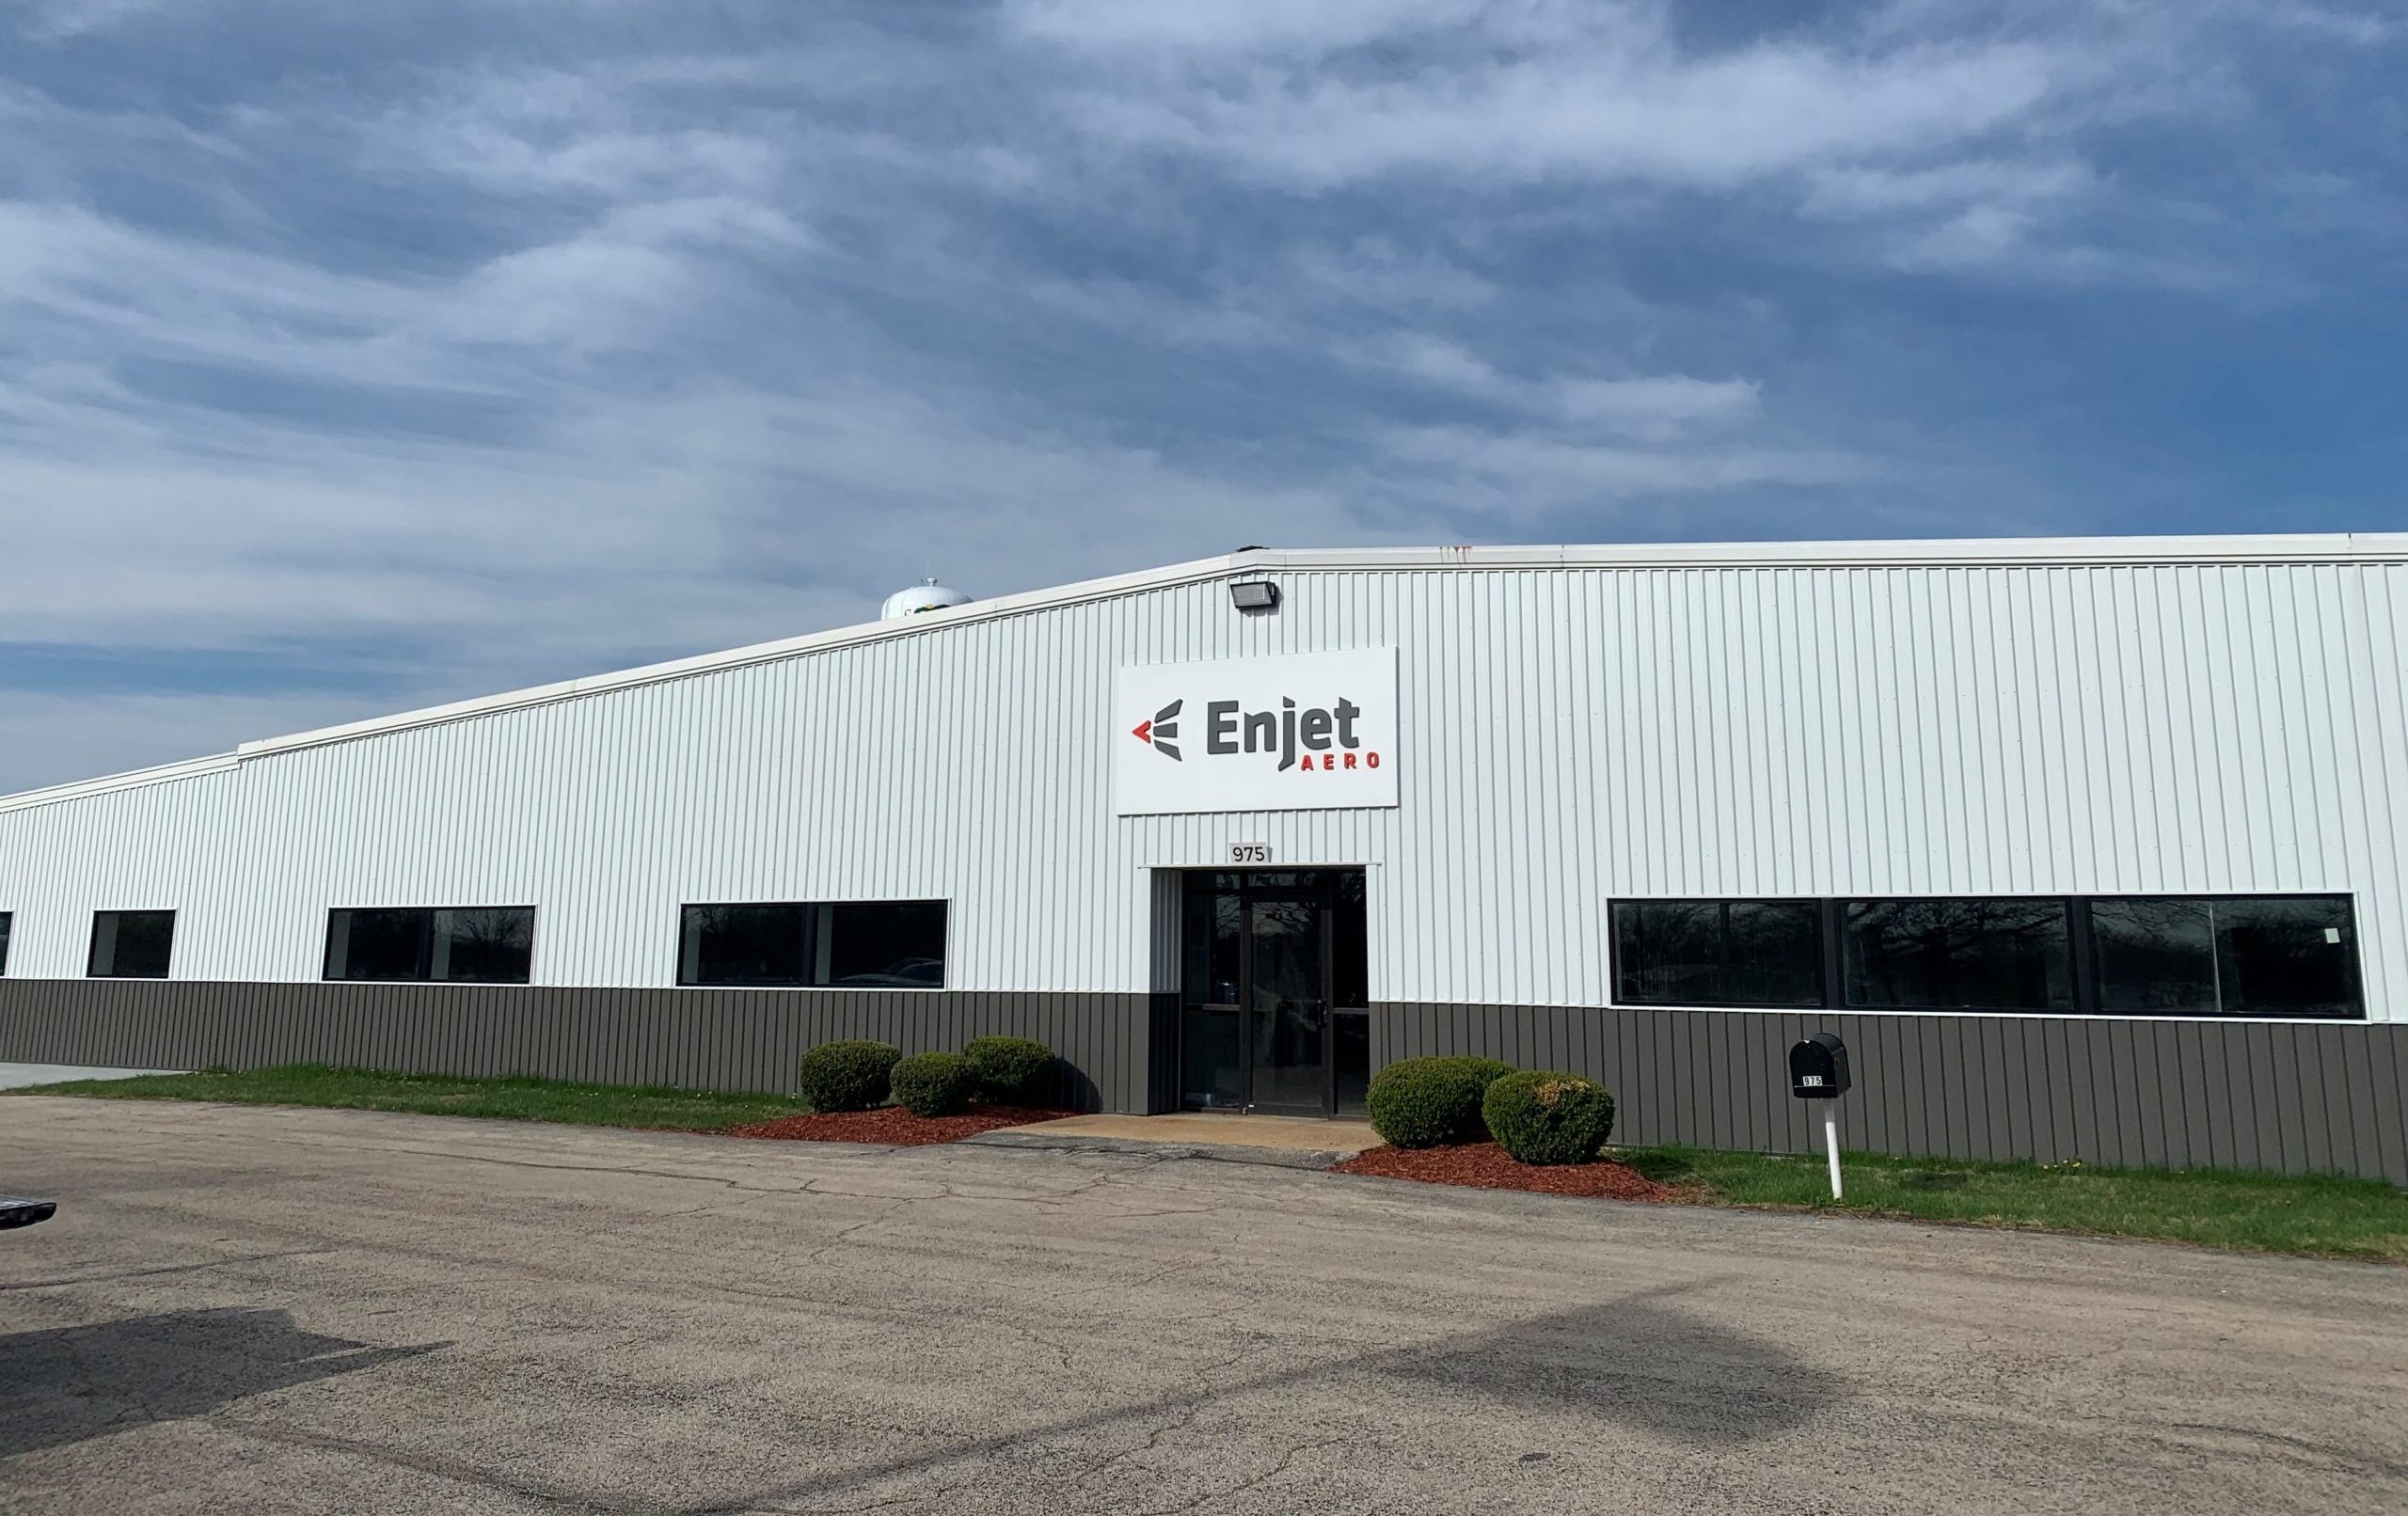 Enjet Aero Completes Second Acquisition of 2019 with Trifecta Aerospace